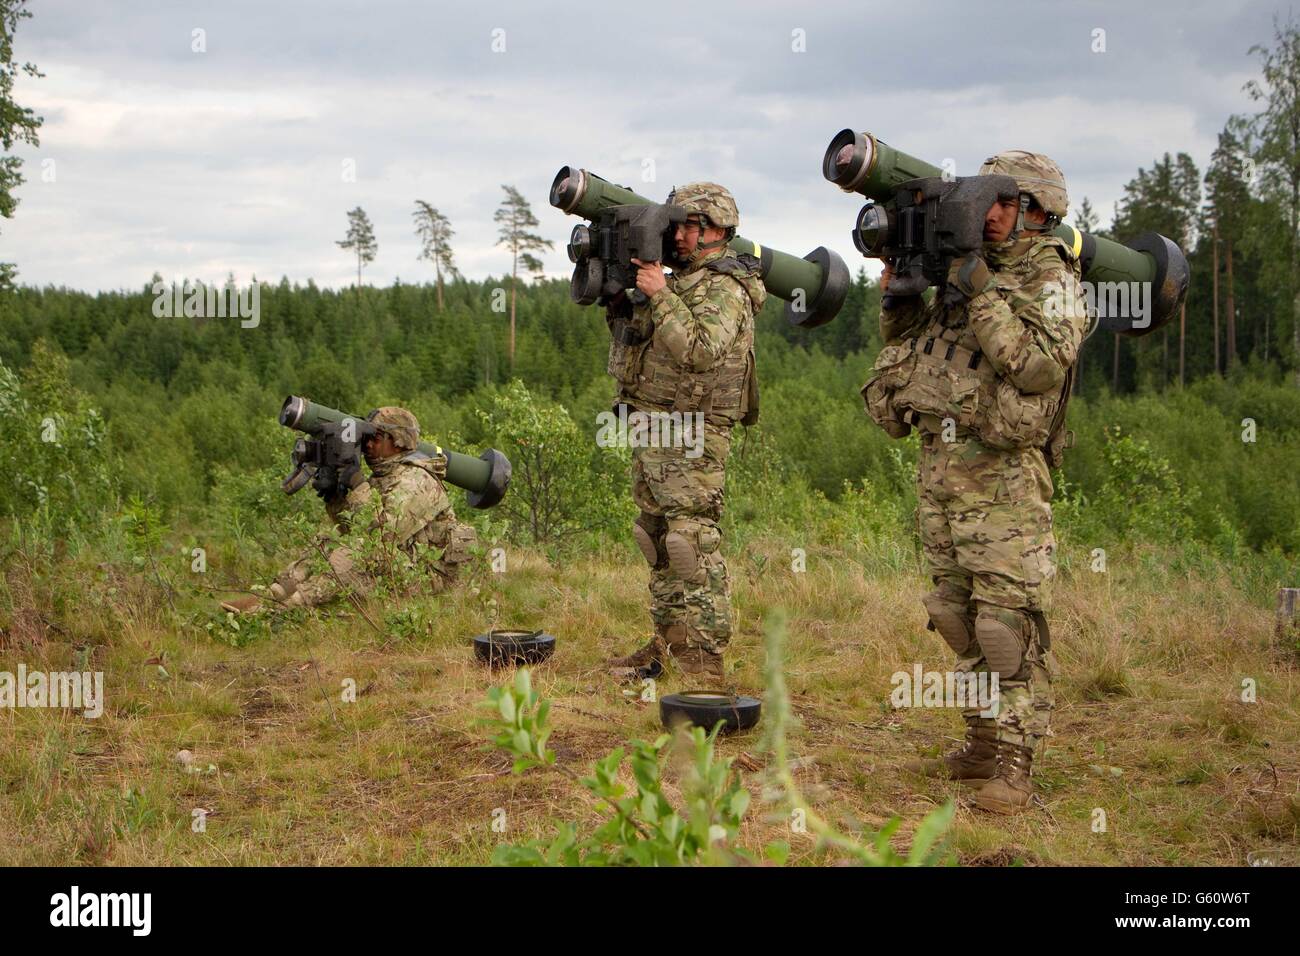 U.S. Army Soldiers from 2nd Cavalry Regiment prepare to fire a shoulder launched FGM-148 Javelin anti-tank missile during during exercise Saber Strike 16 at the Estonian Defense Forces central training area June 19, 2016 near Tapa, Estonia. Stock Photo